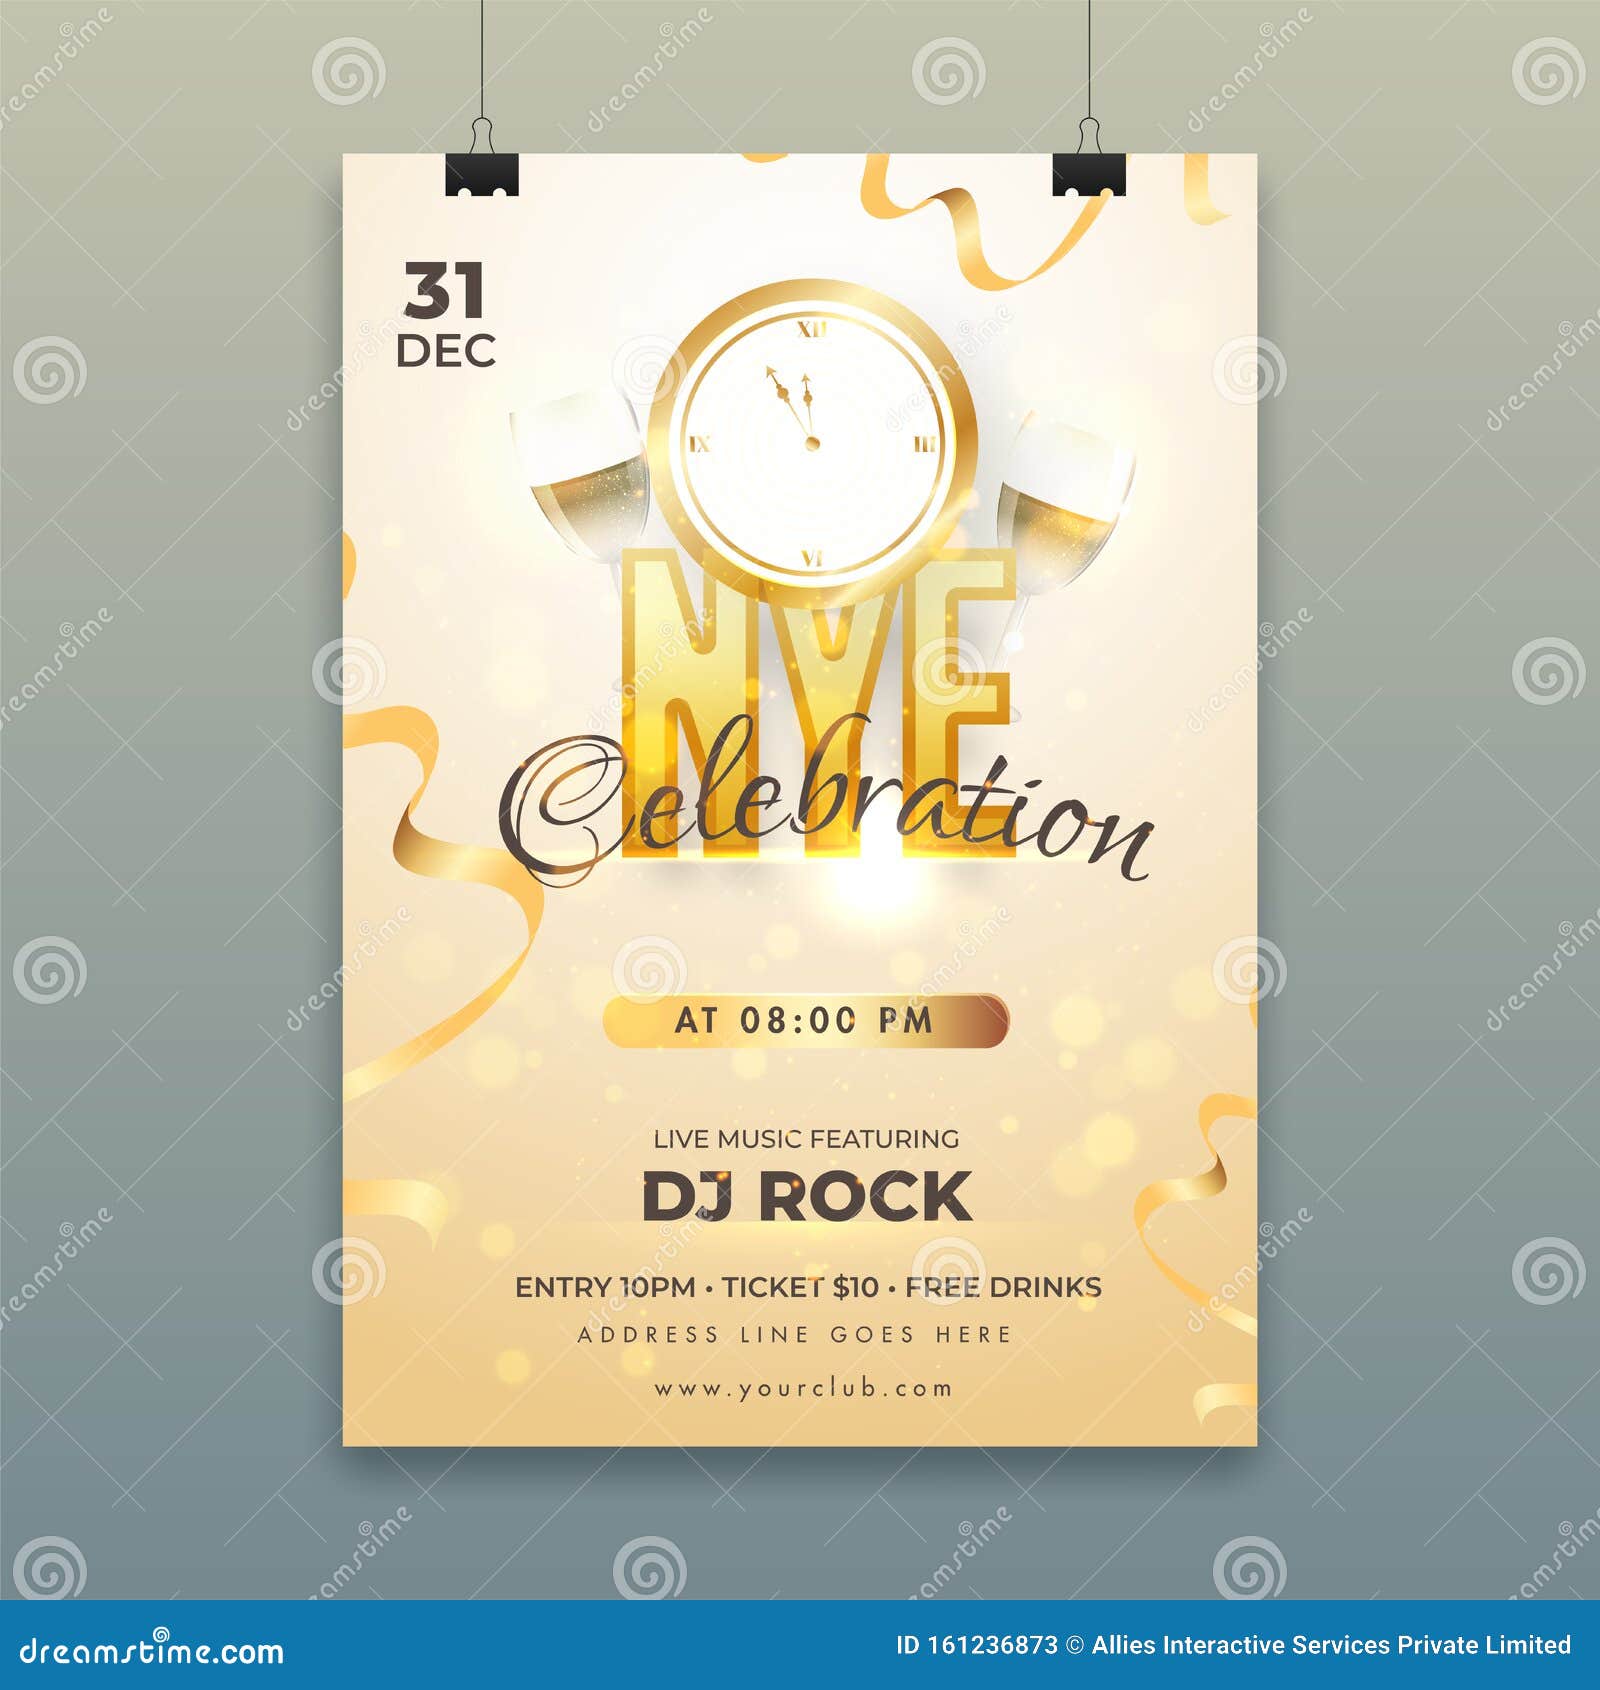 advertising template or flyer  with clock, wine glass and event details for nye.